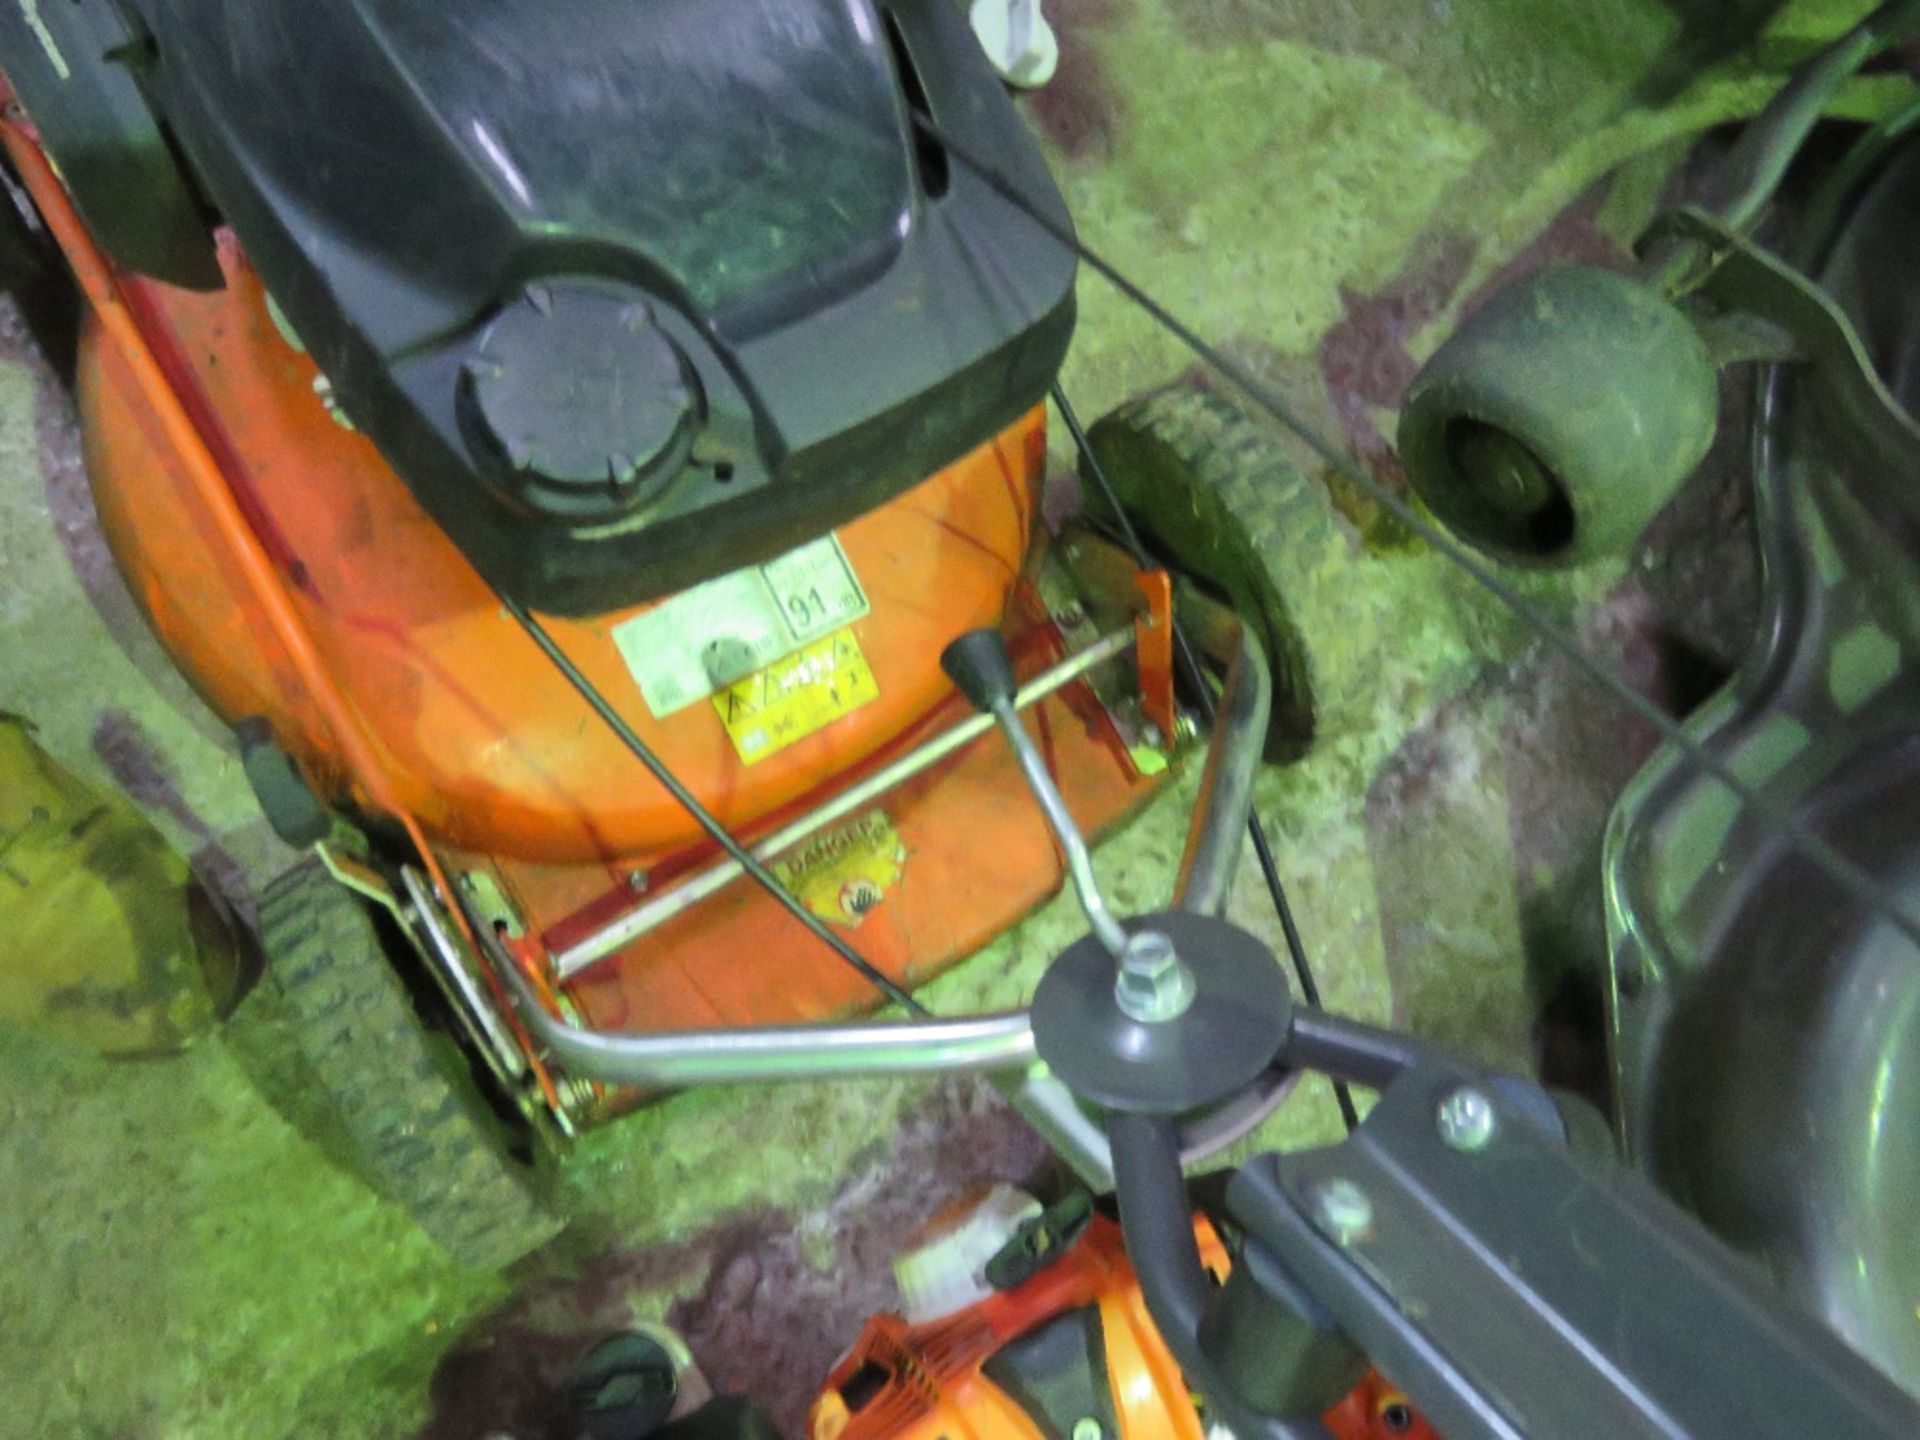 HUSQVARNA PROFESSIONAL MOWER. DIRECT FROM LANDSCAPE MAINTENANCE COMPANY DUE TO DEPOT CLOSURE. - Image 3 of 4